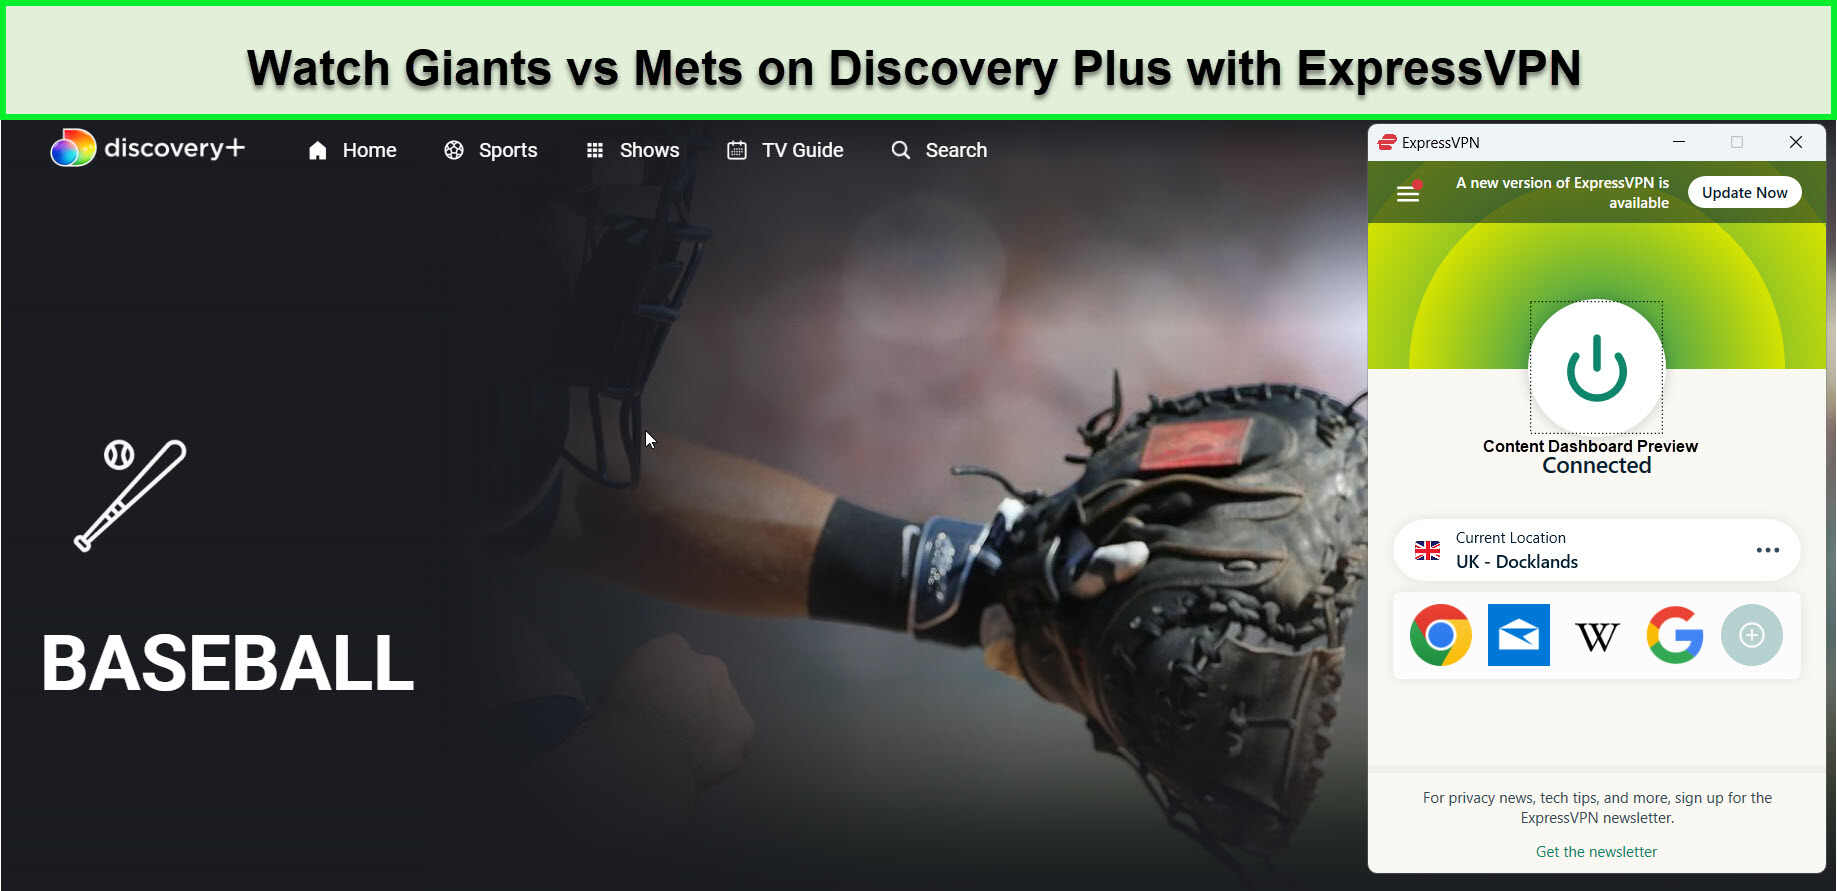 Watch-Giants-vs-Mets-in-Hong Kong-on-Discovery-Plus-with-ExpressVPN